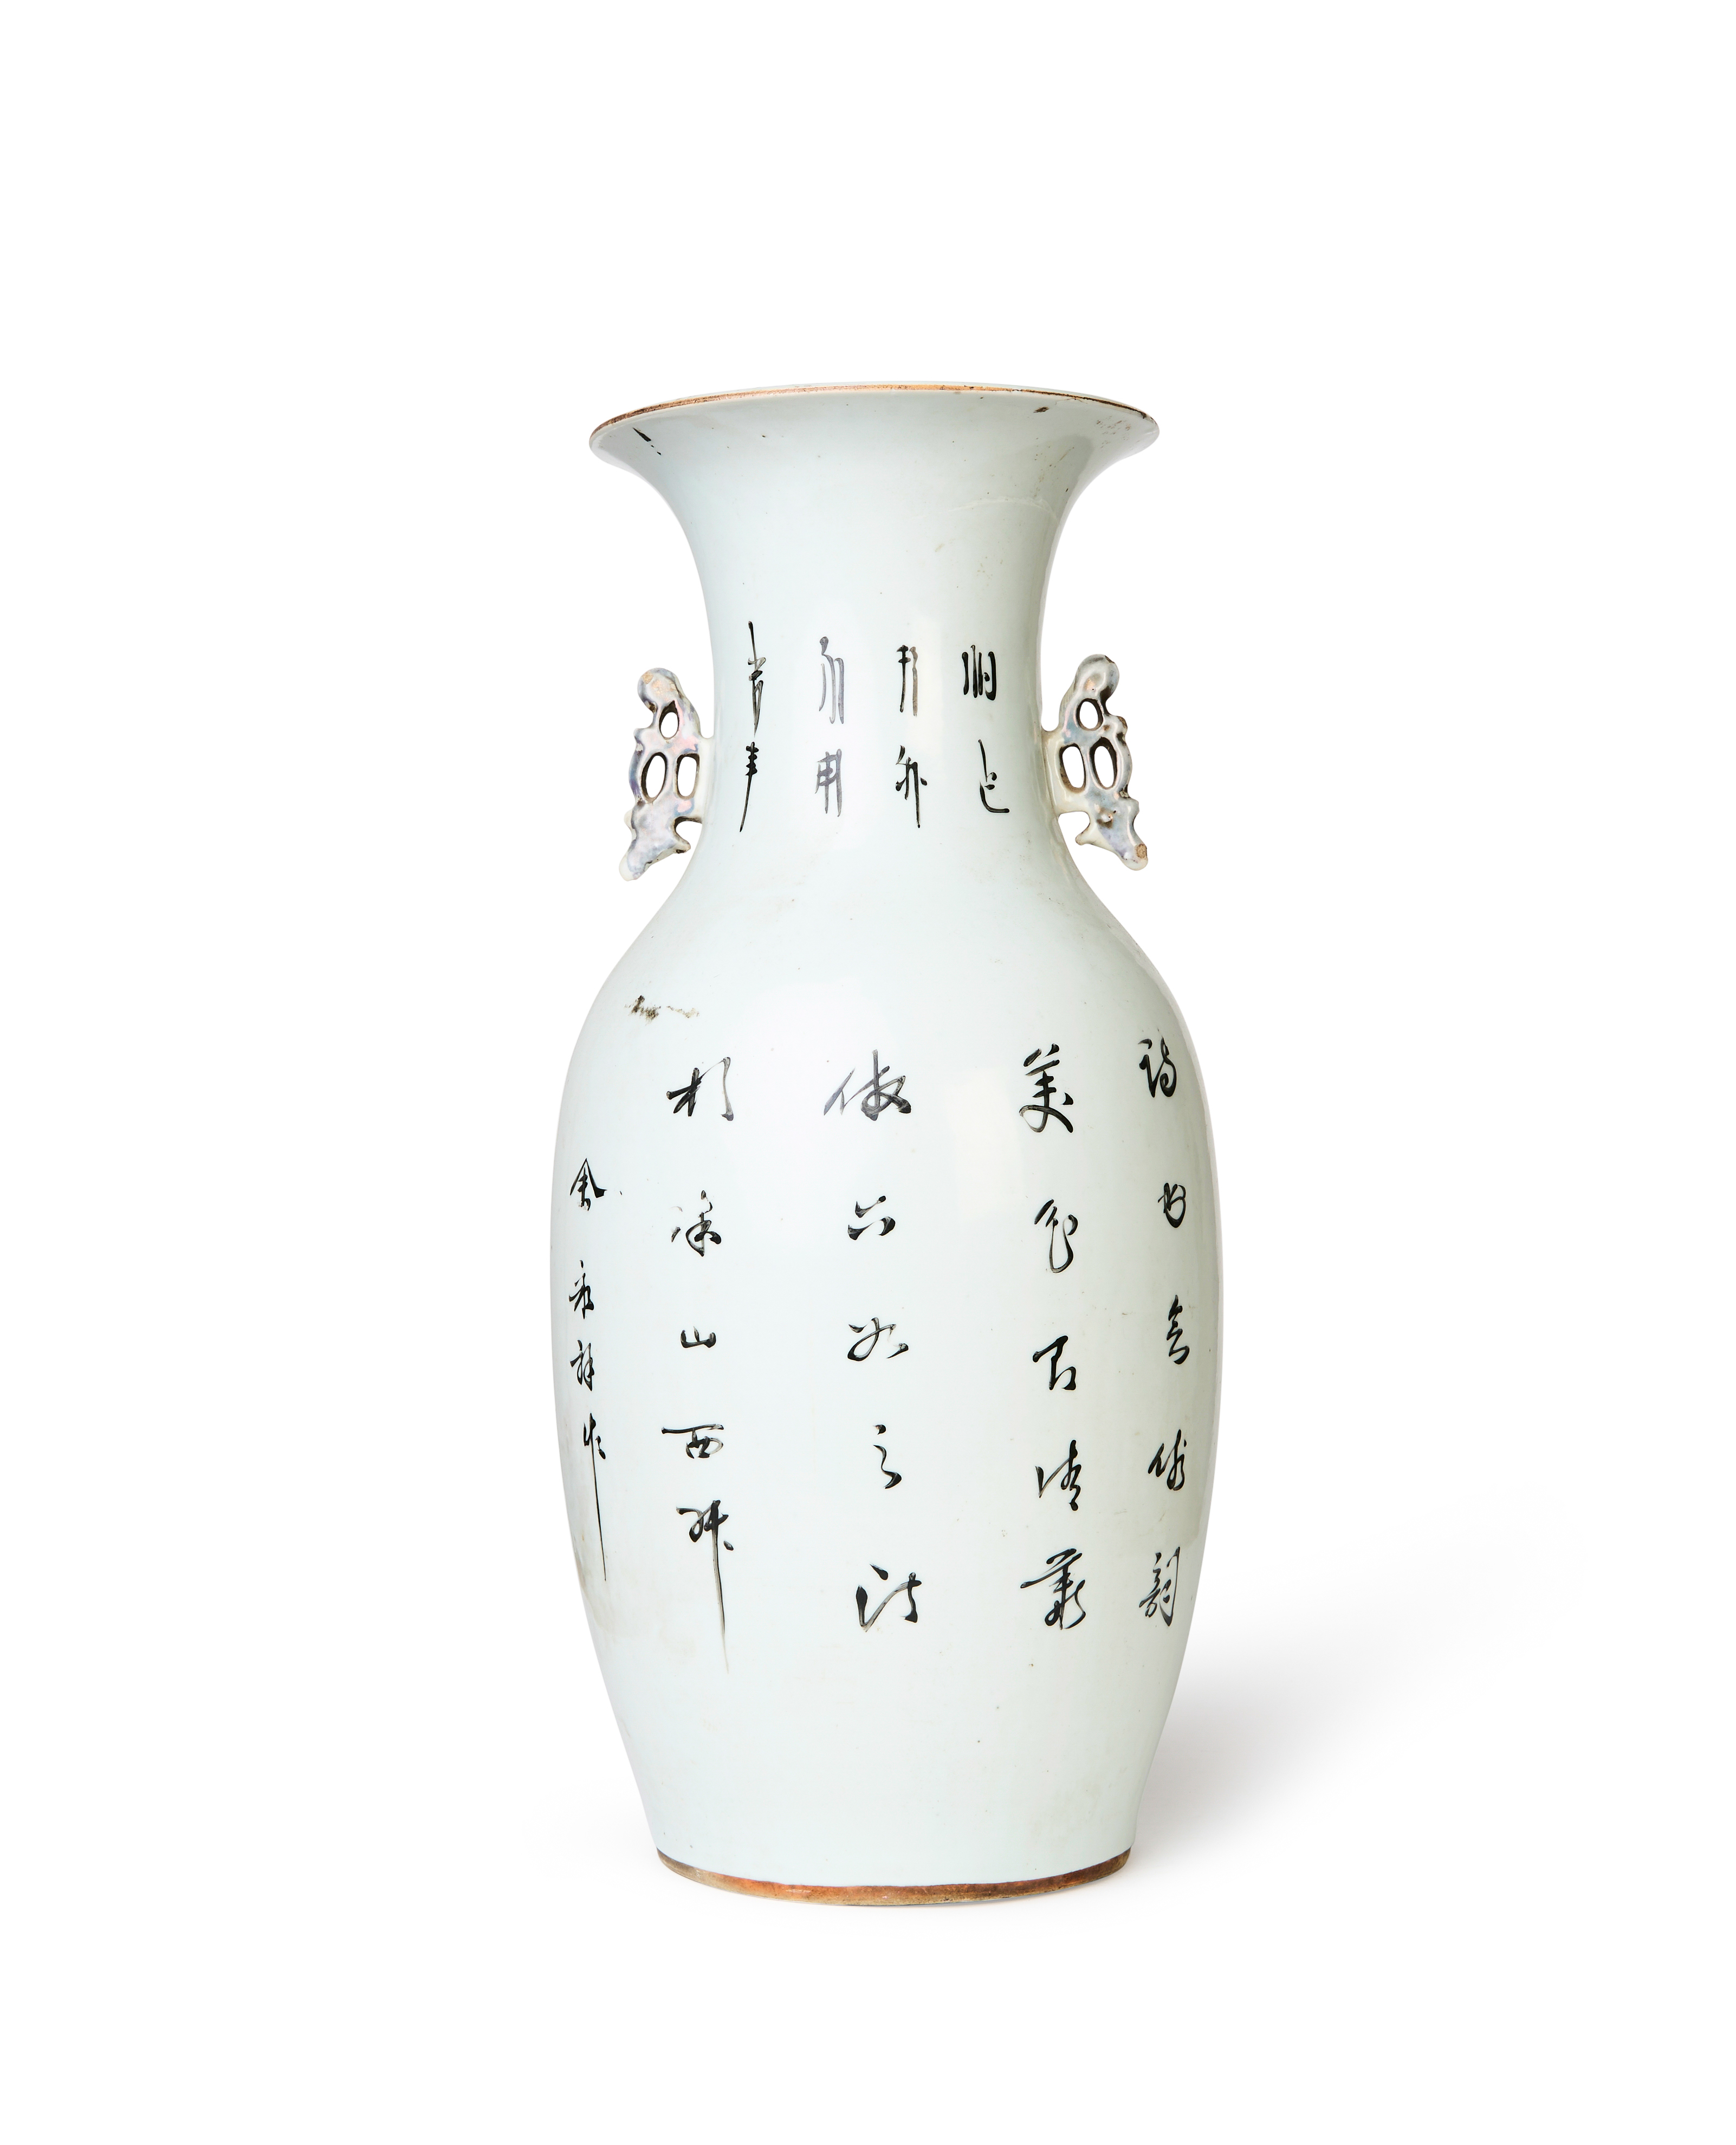 A LARGE CHINESE FAMILLE ROSE VASE, REPUBLIC PERIOD - Image 2 of 4